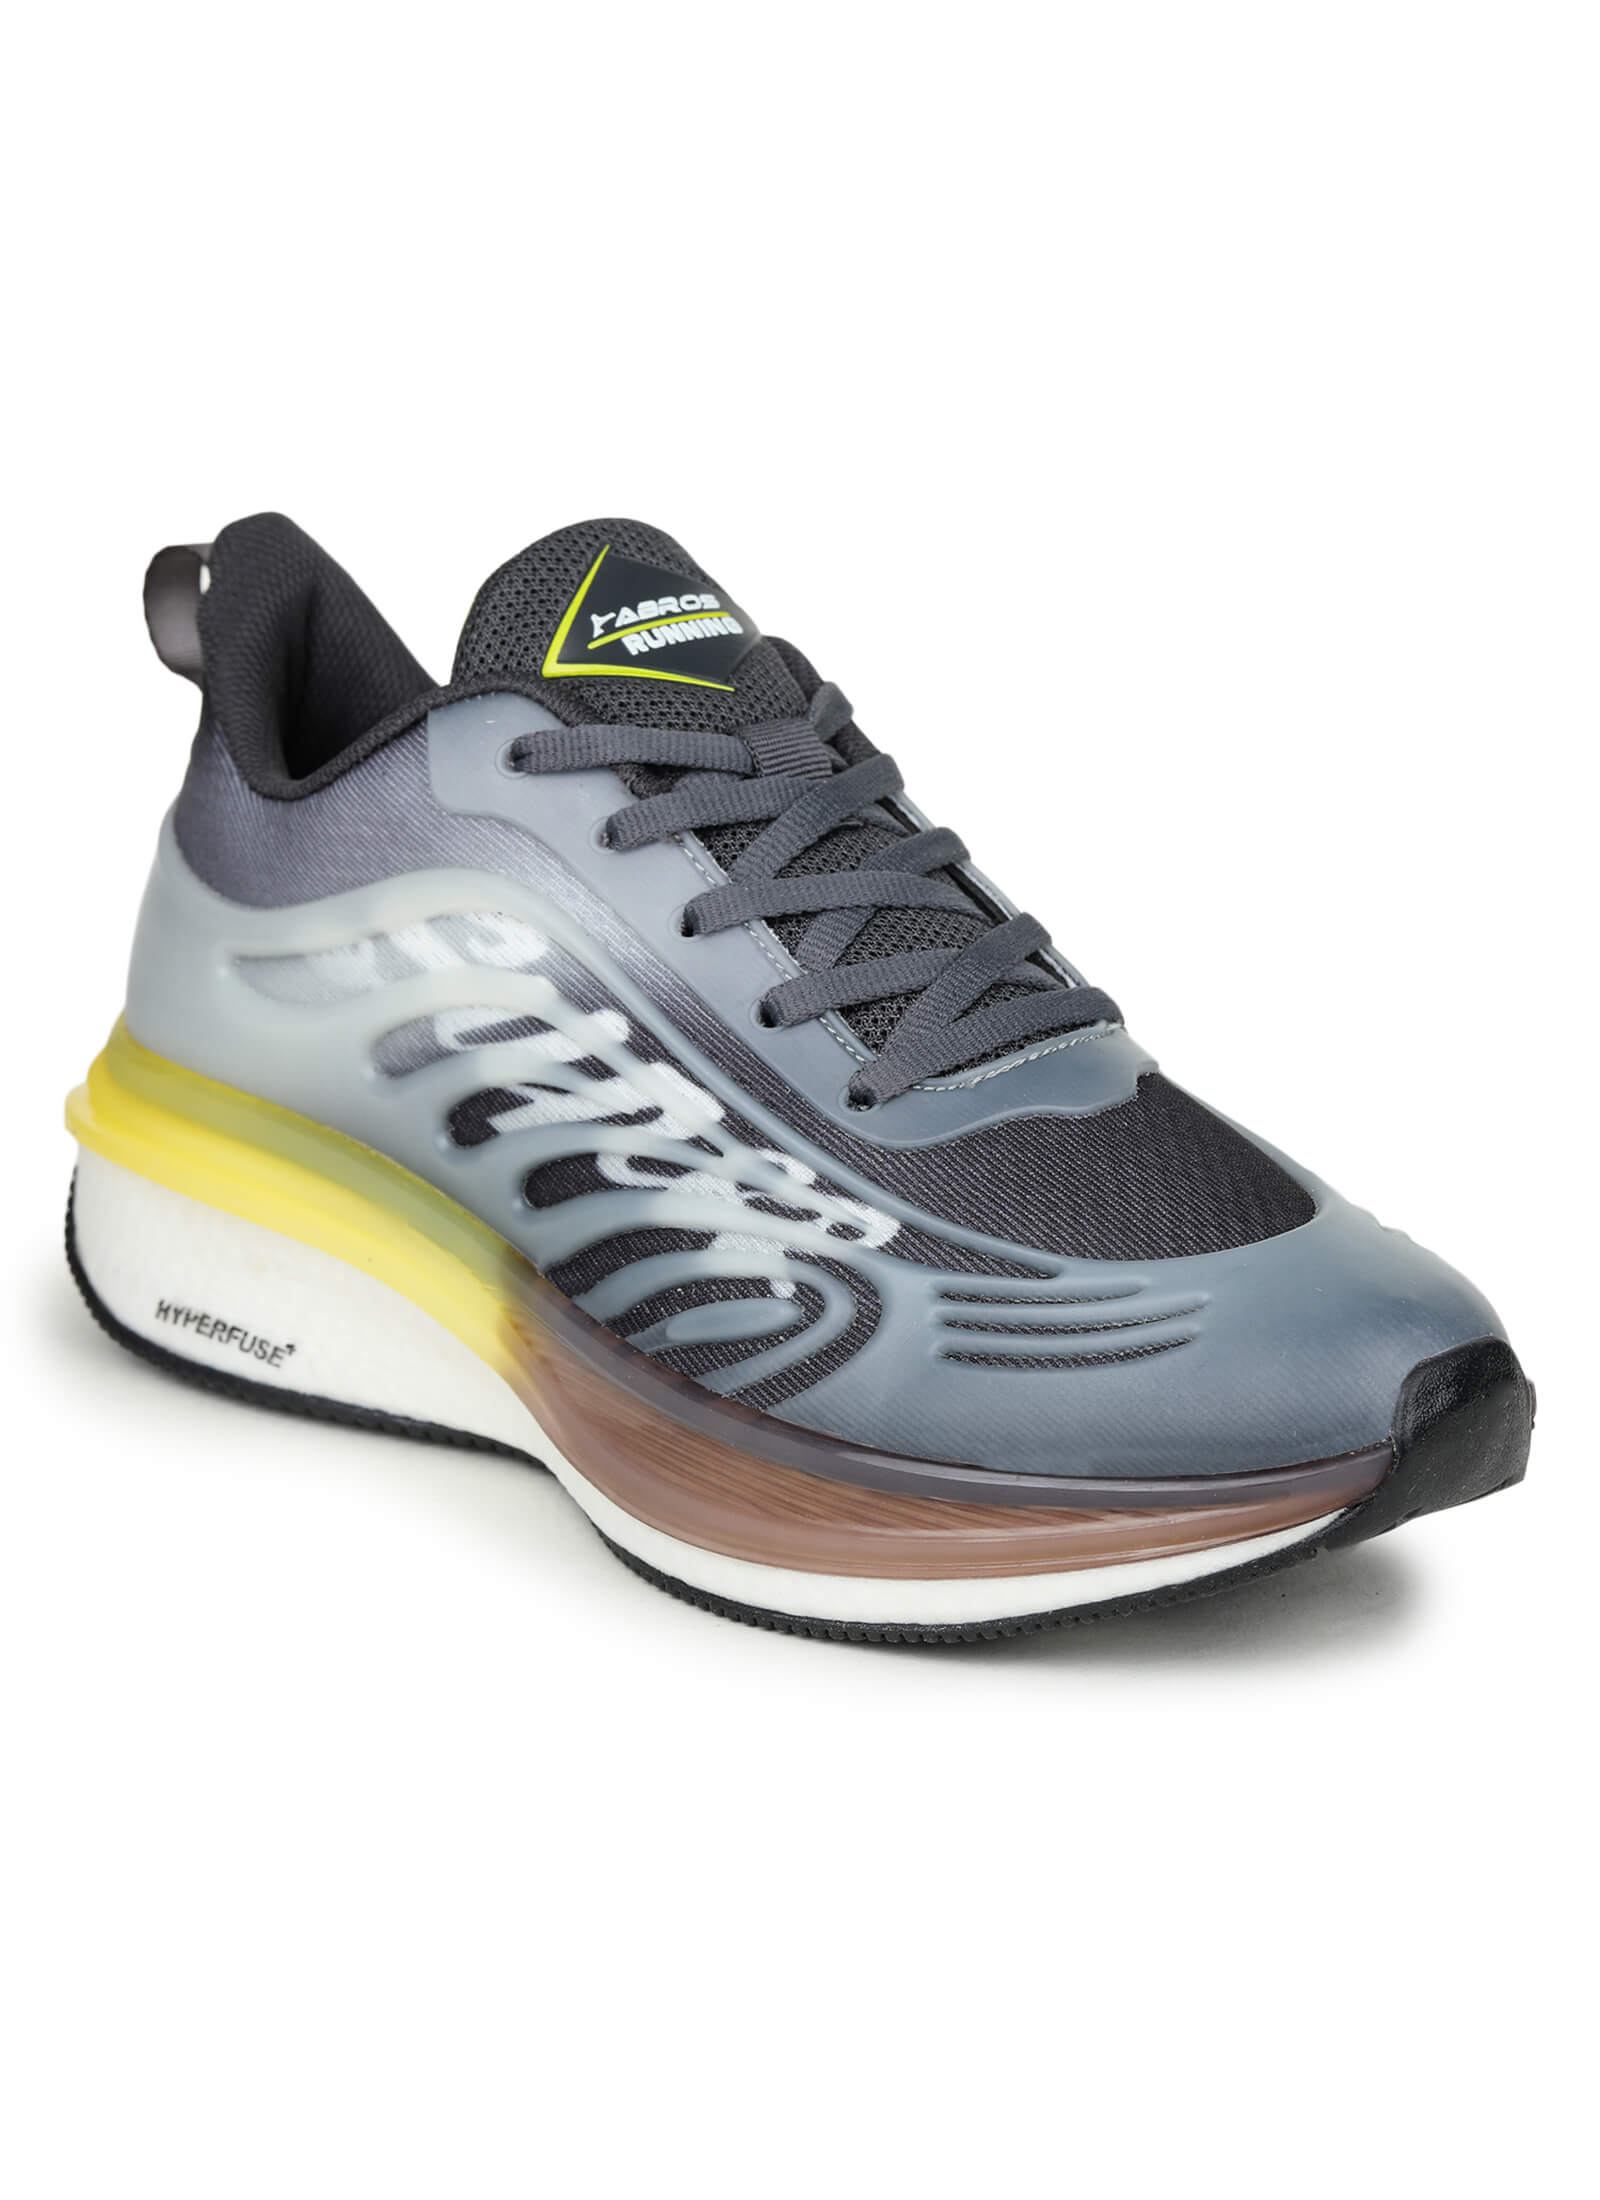 Wagon Hyper Fuse Sports Shoes For Men